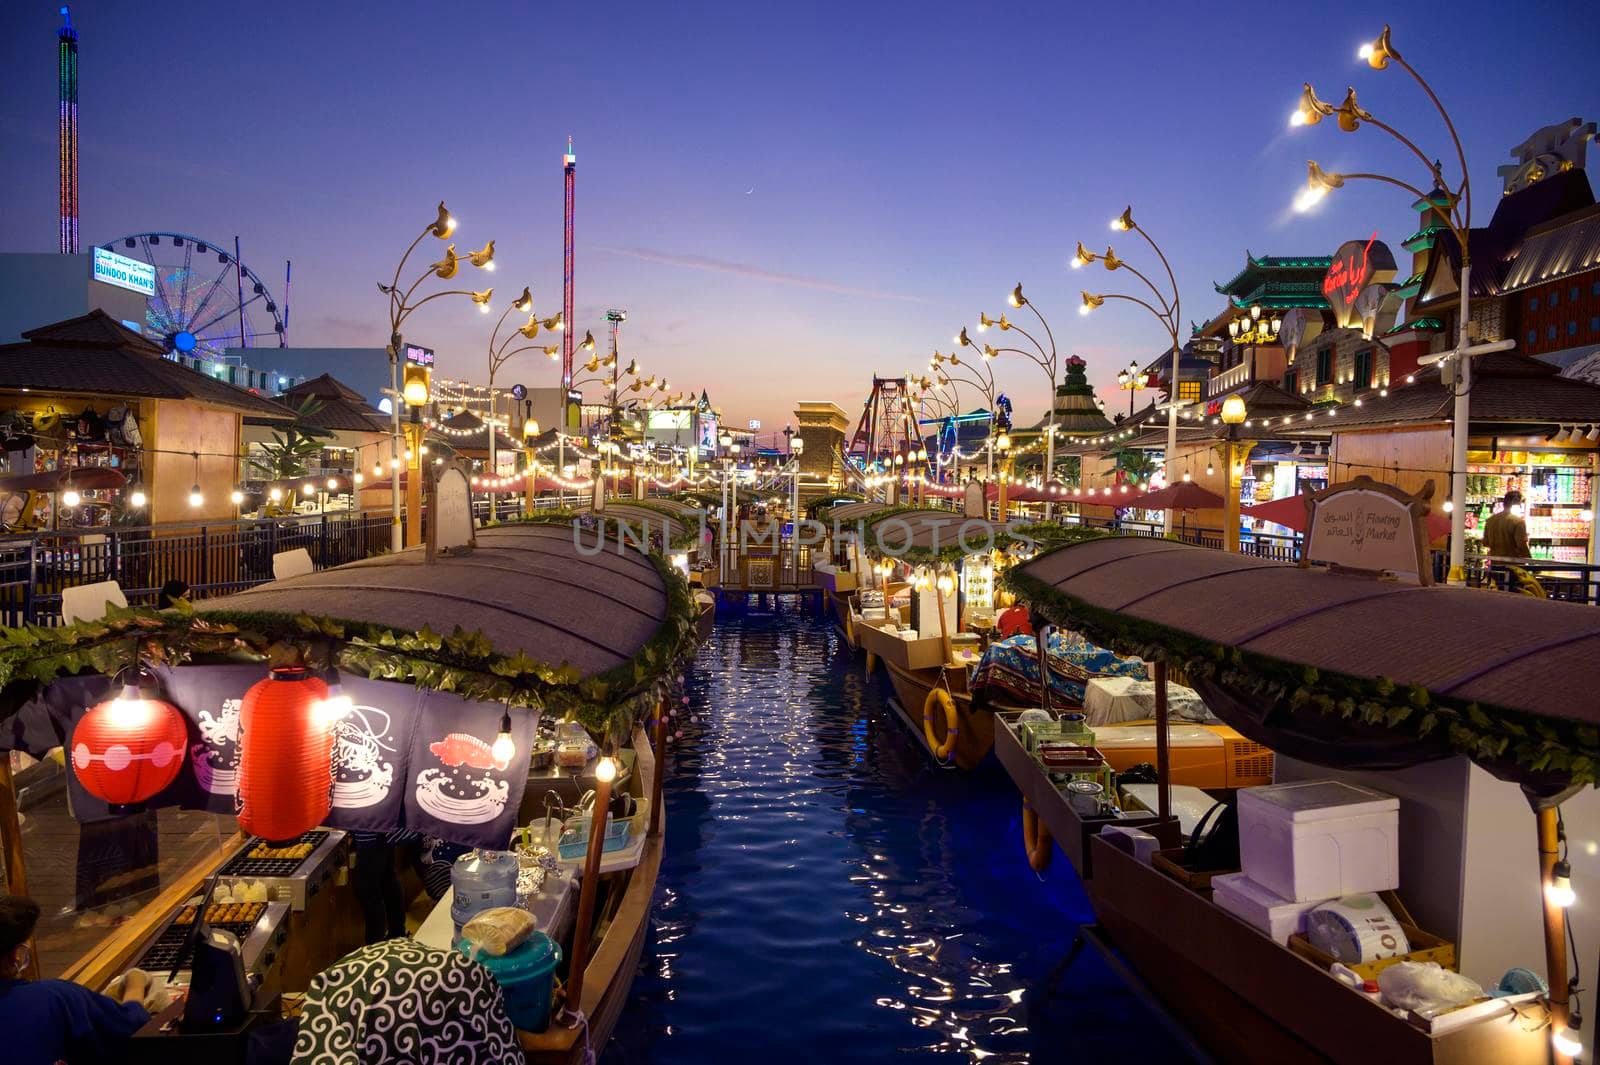 Dubai UAE, DEC 16 2020 Beautiful view of the Bangkok floating markets selling exotic Thai food in the park entertainment center captured in the sunset time at The Global Village, Dubai ,UAE.